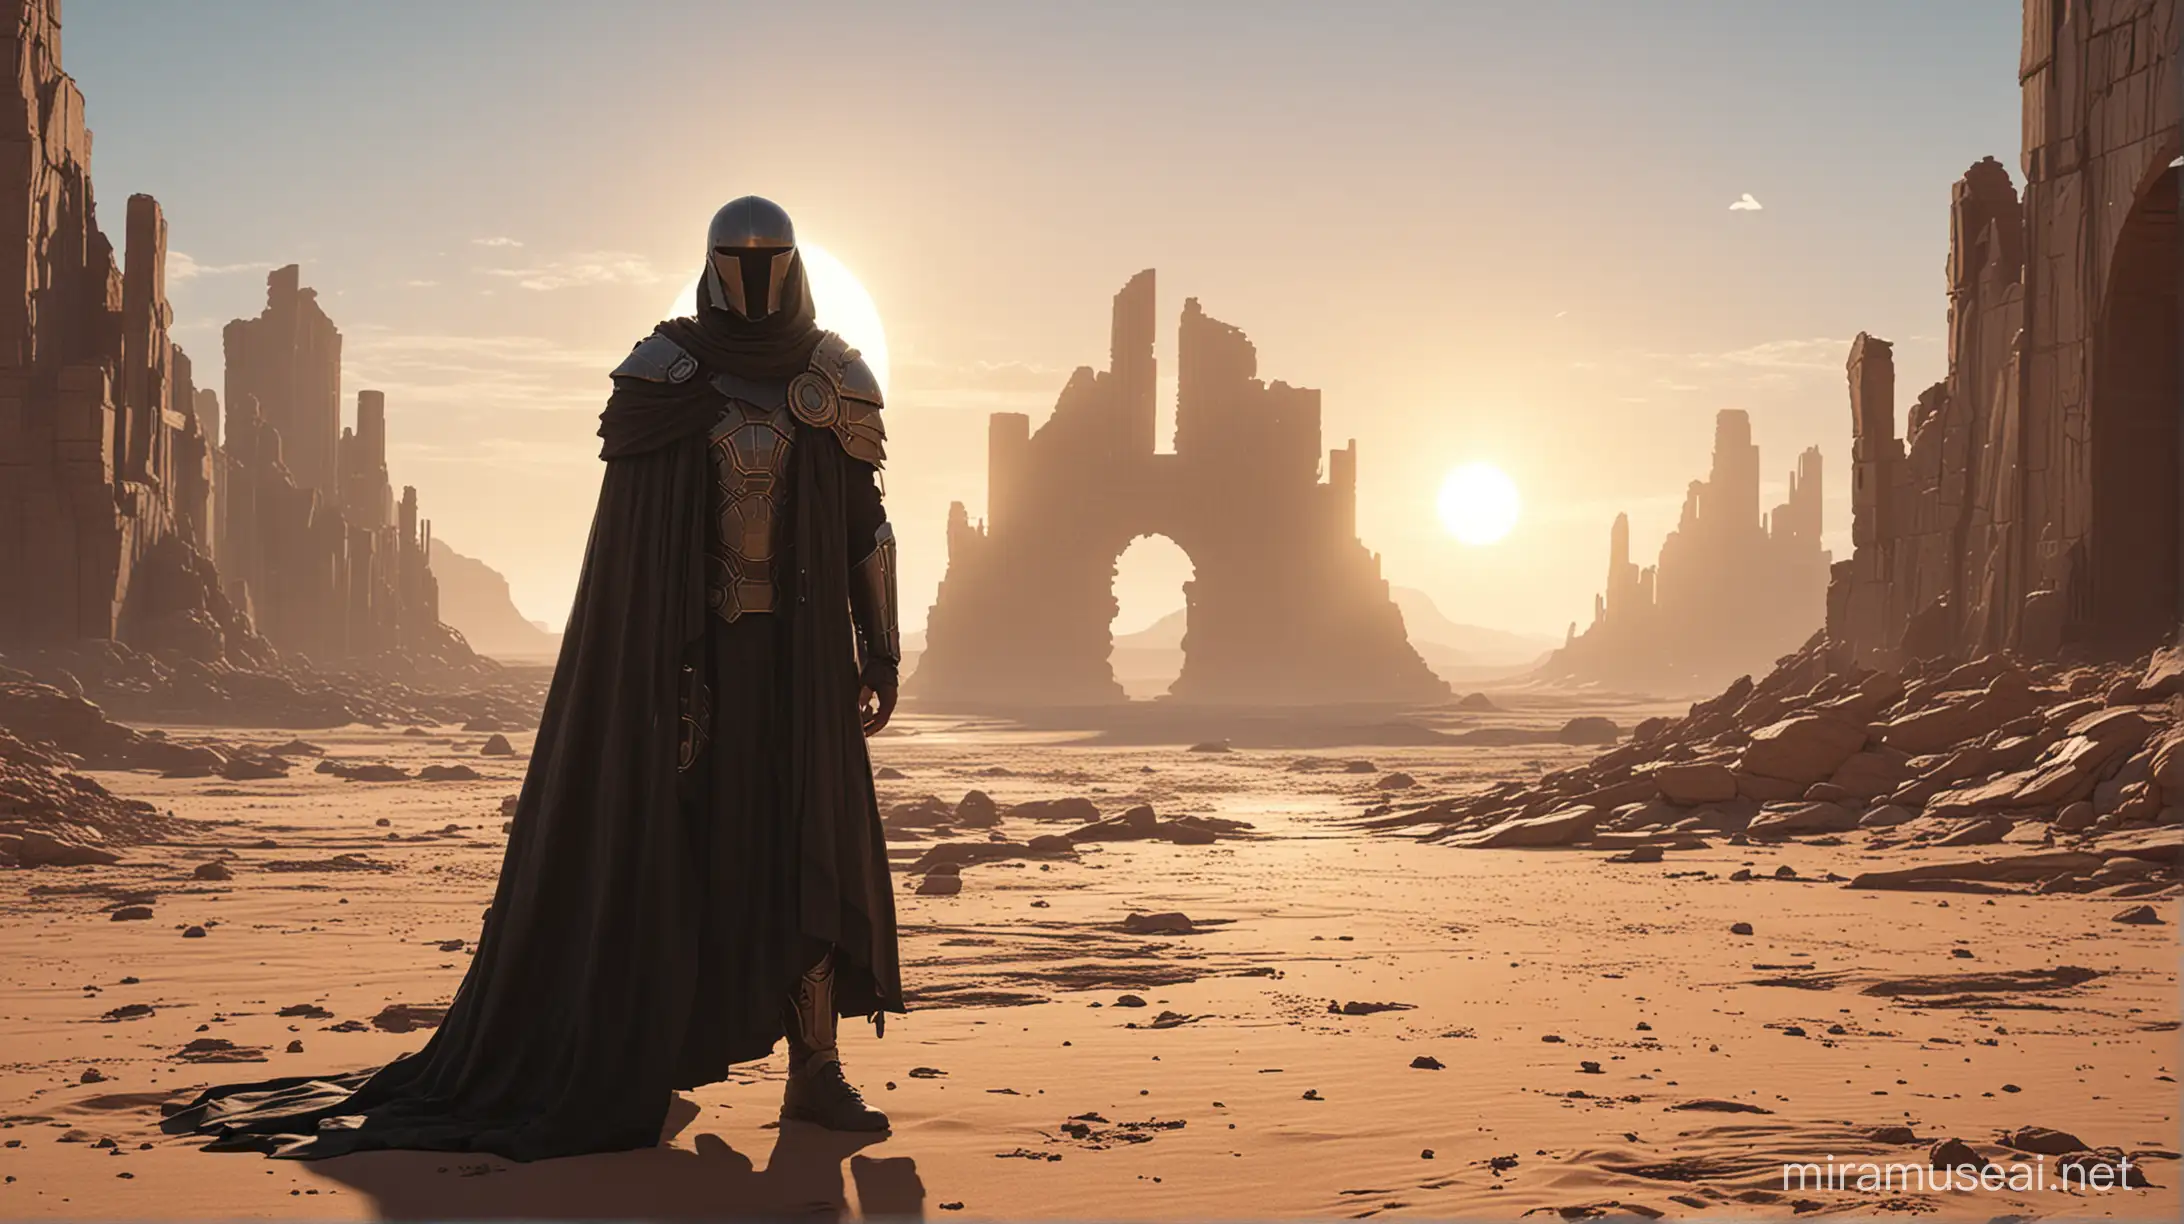 Desert, ruined buildings, two suns, man standing, wearing cloak and futuristic armour